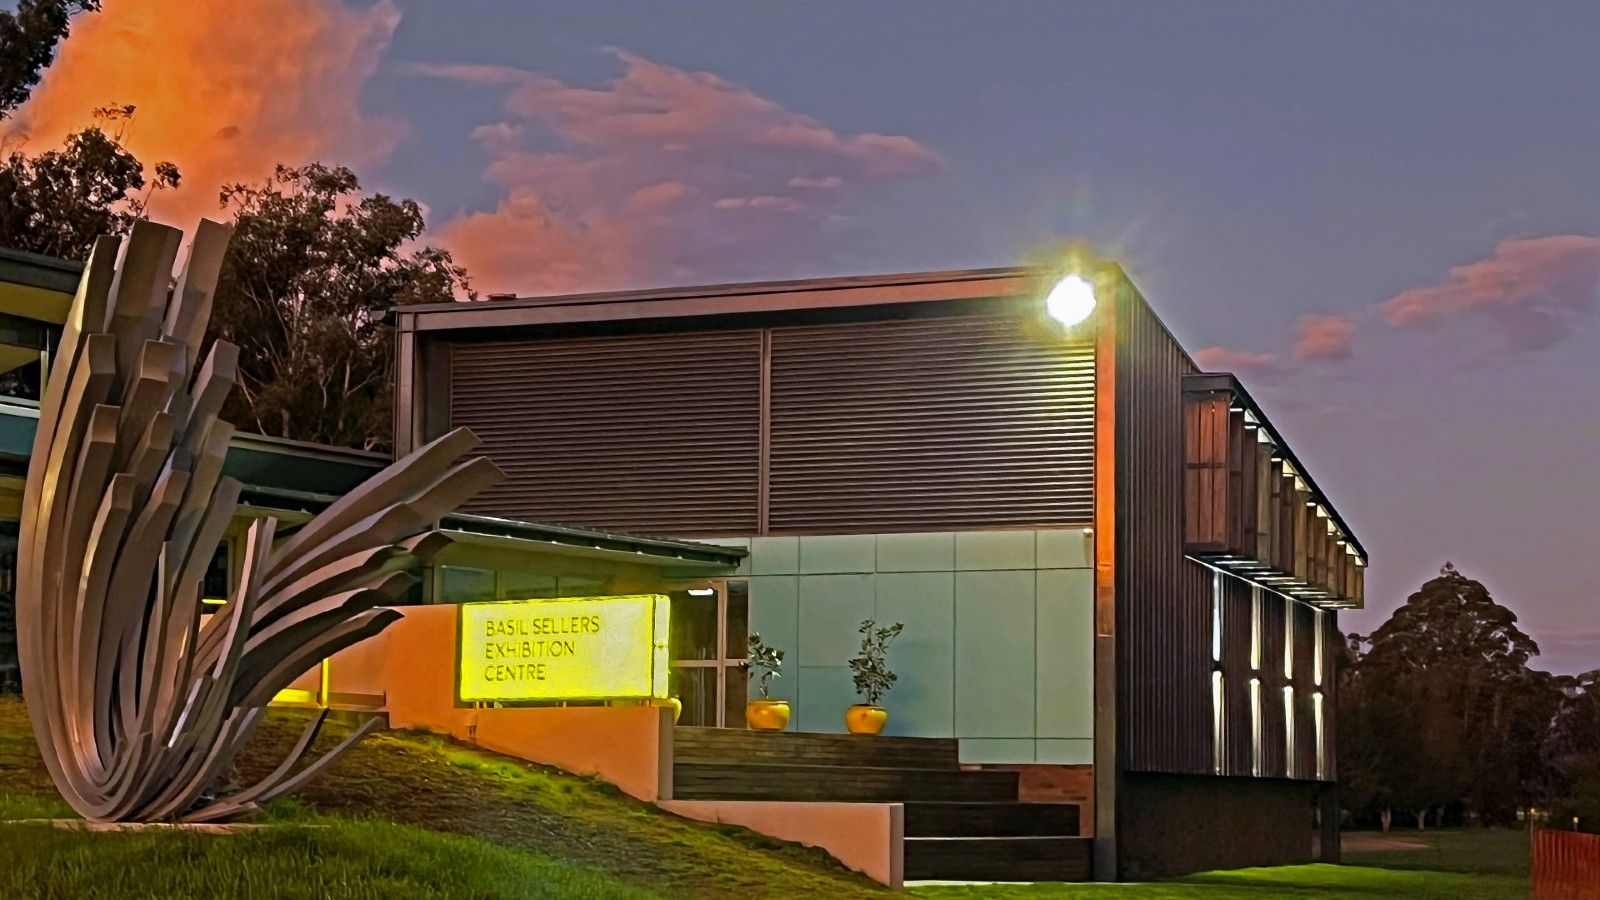 A night shot of a building showing signage and lighting and sunset. banner image